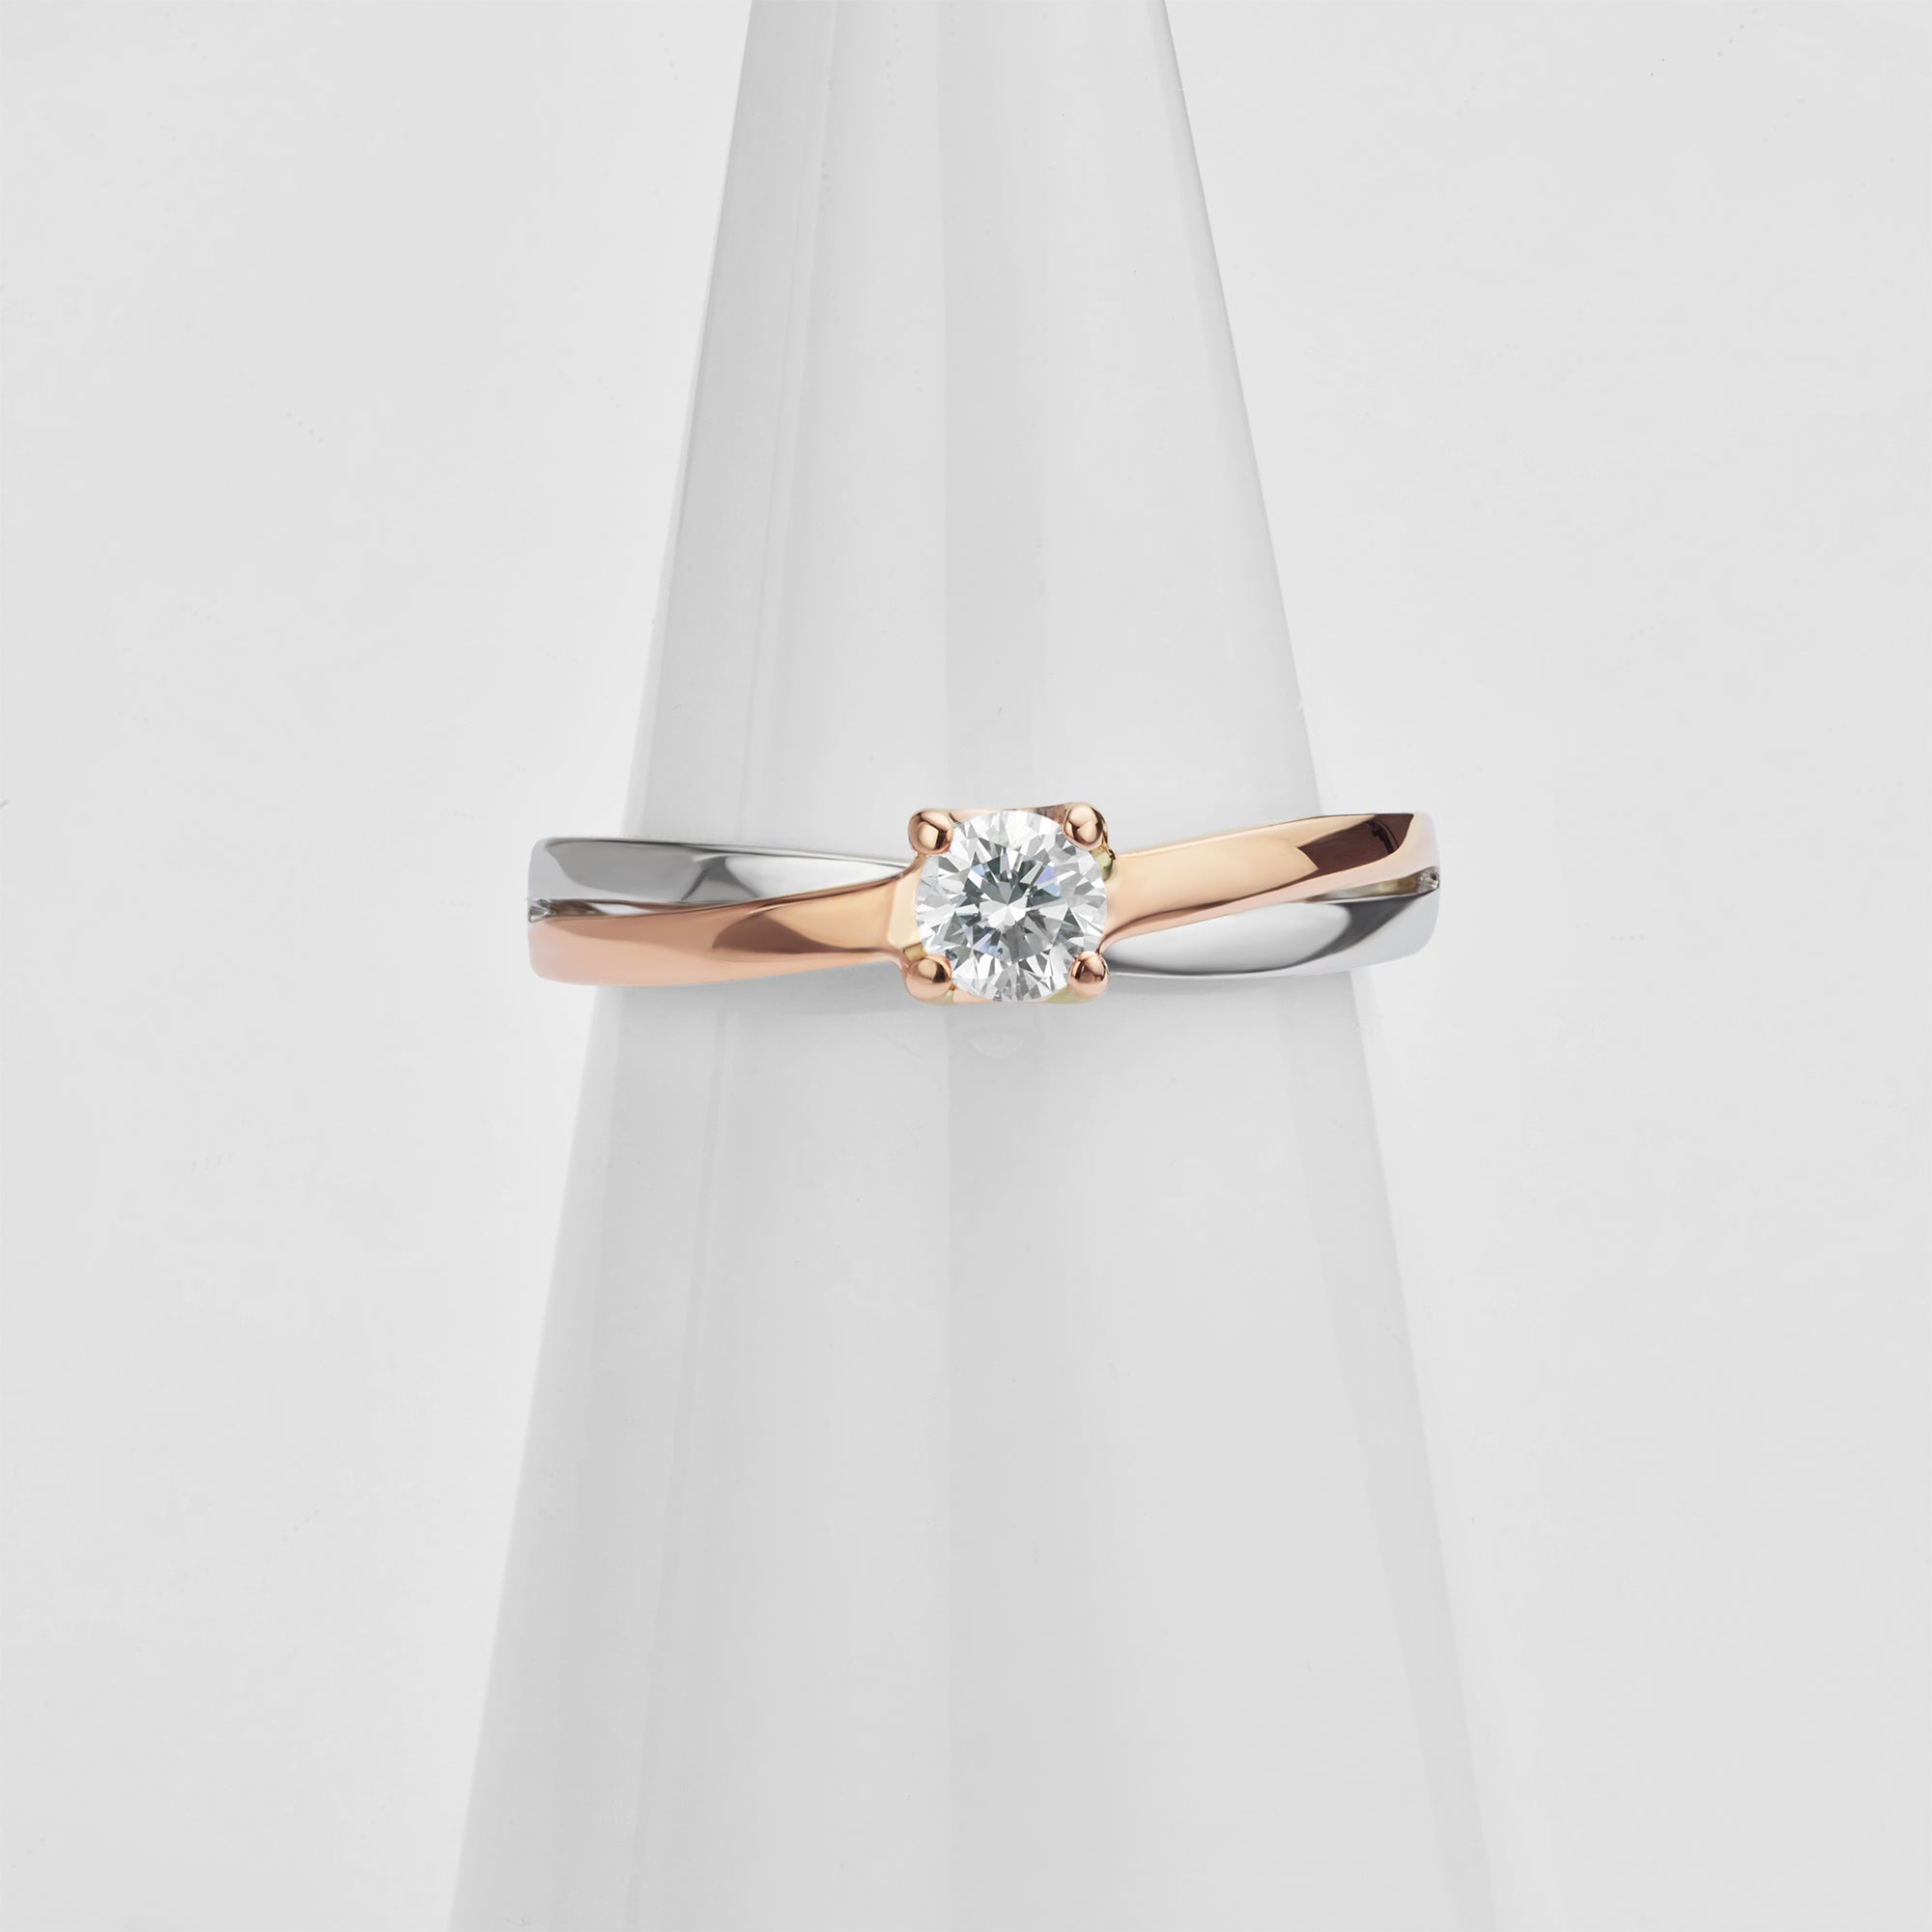 Front view of the pre-loved rose and white gold diamond engagement ring